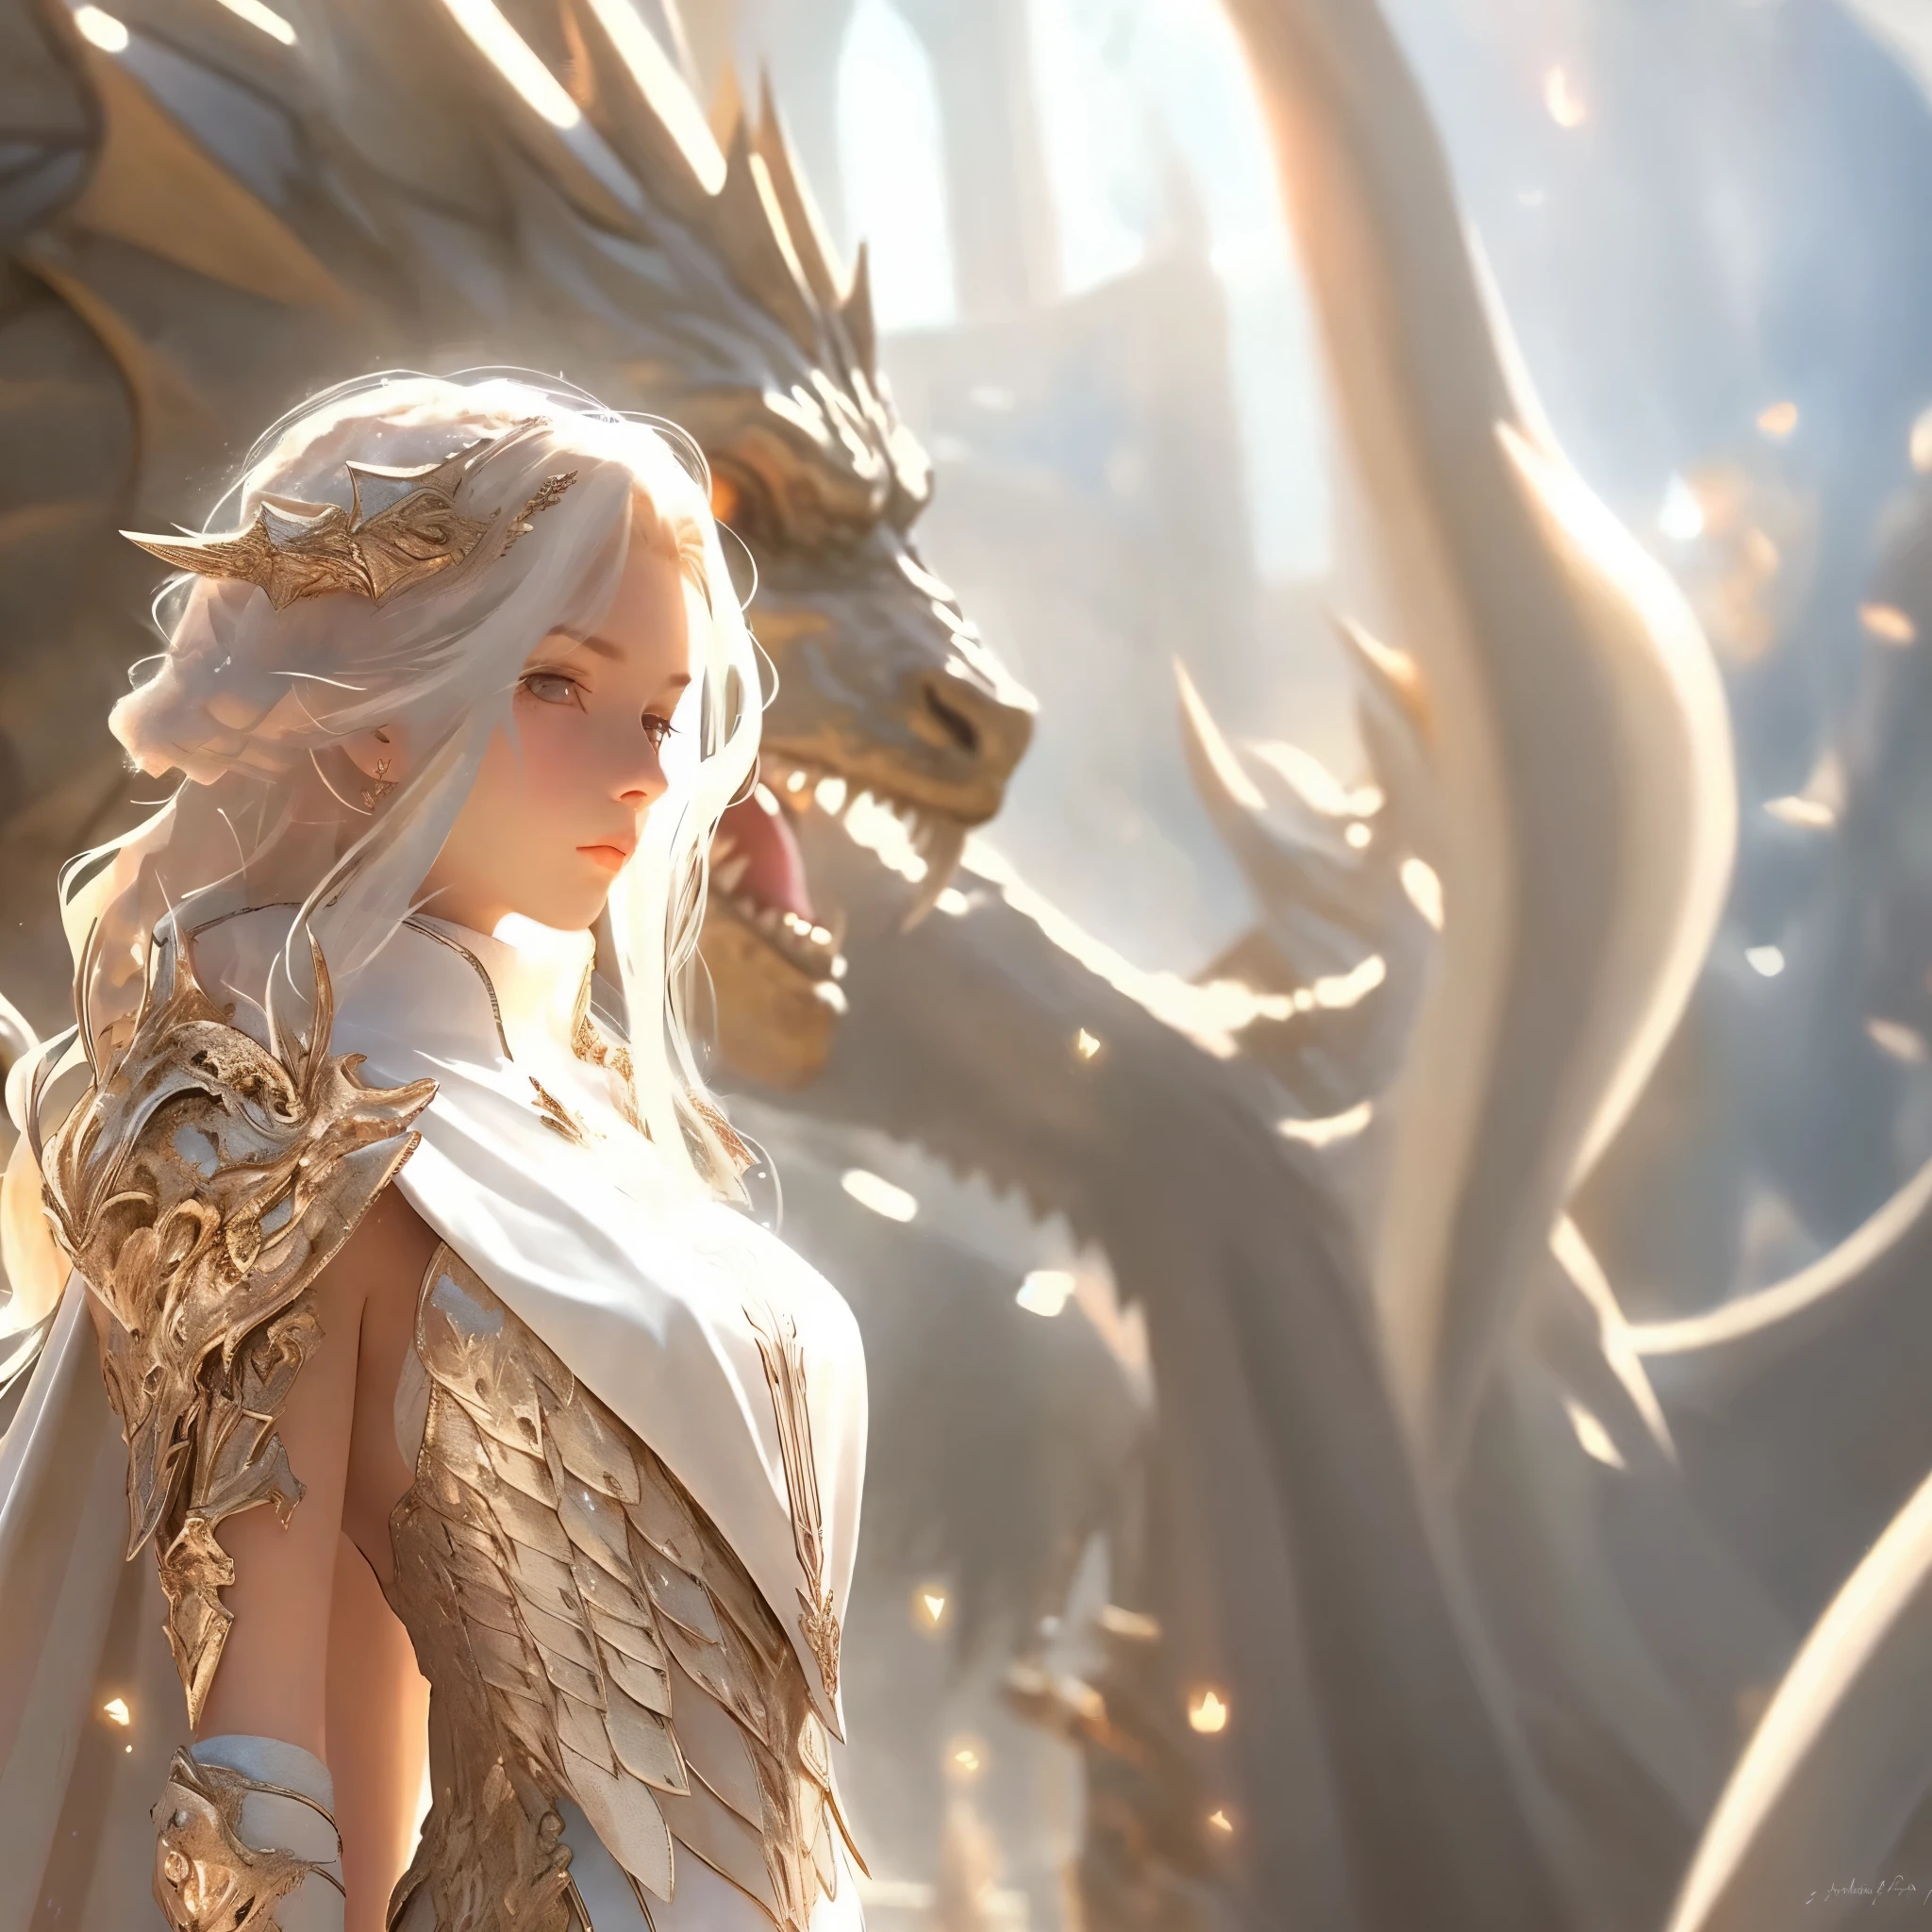 Close-up of a woman in a white dress and a dragon, ross tran and wop, detailed fantasy art, 2. 5D CGI Anime Fantasy Artwork, 4k fantasy art, fantasy art style, fantasy art behavior, Elegant cinematic fantasy art, Wop and Rose Tran, deviantart and cgsociety, stunning cg, author：Yang Jie